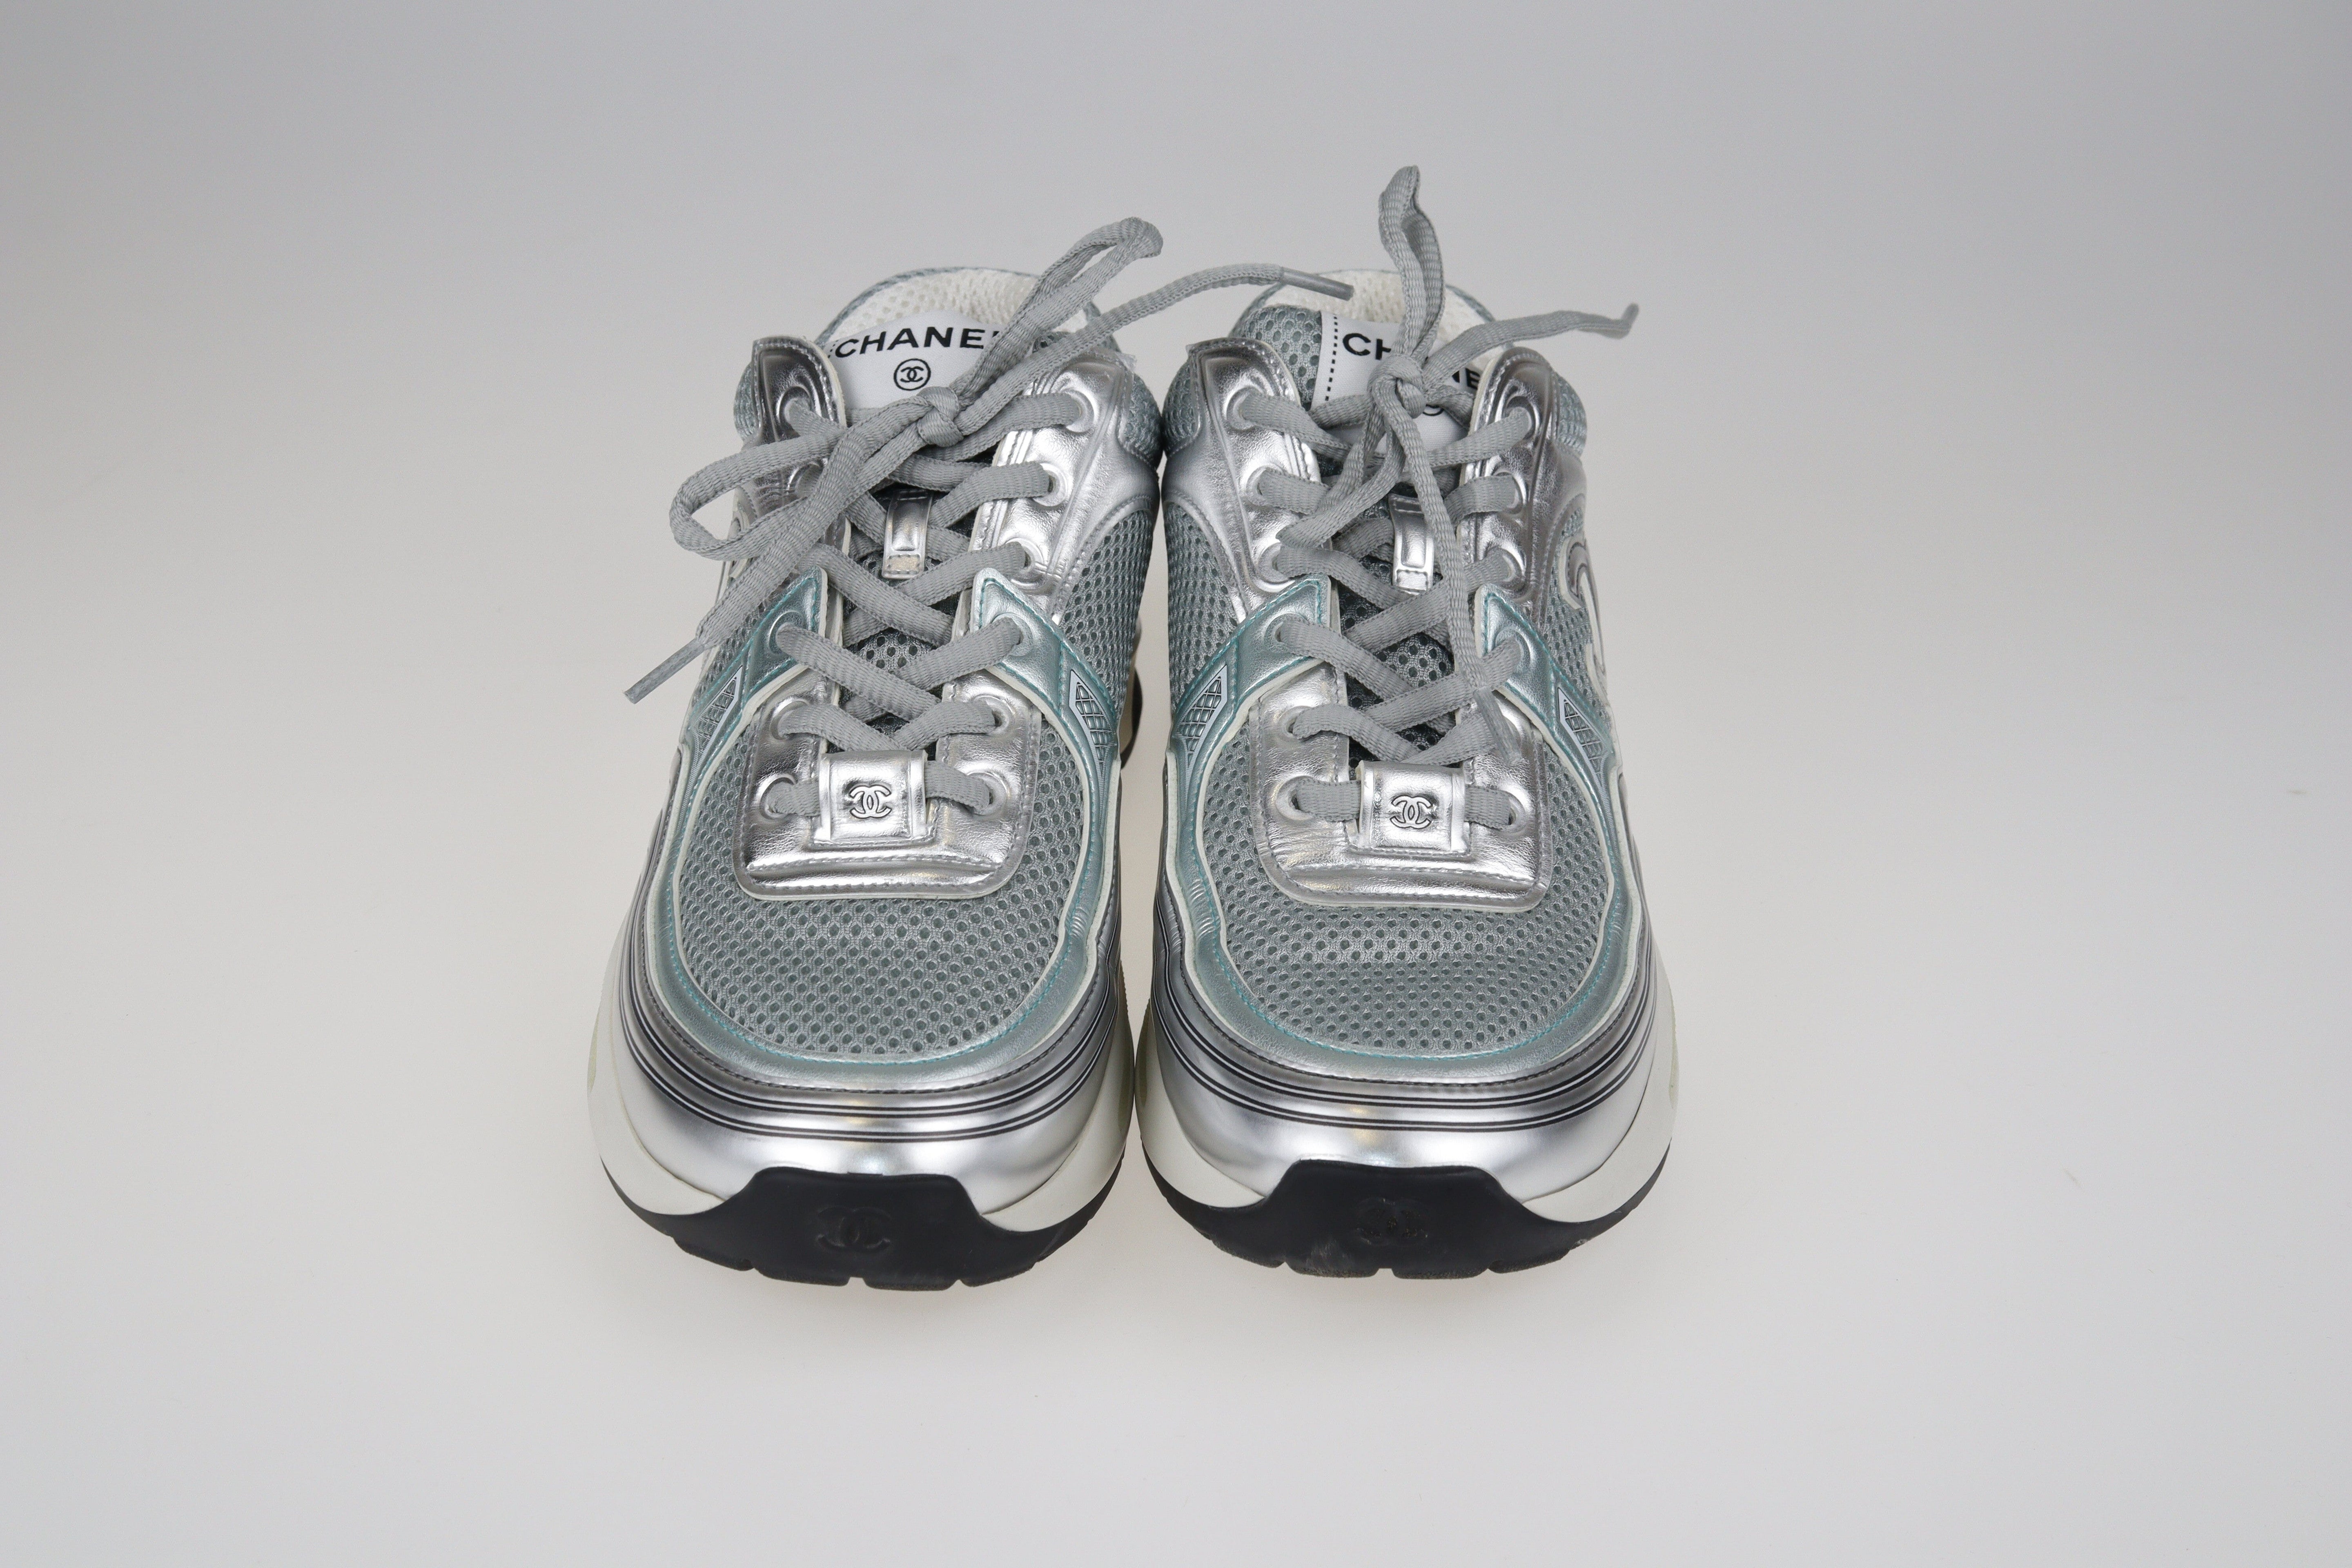 Silver/Turquoise CC Low Top Sneakers Shoes Chanel 